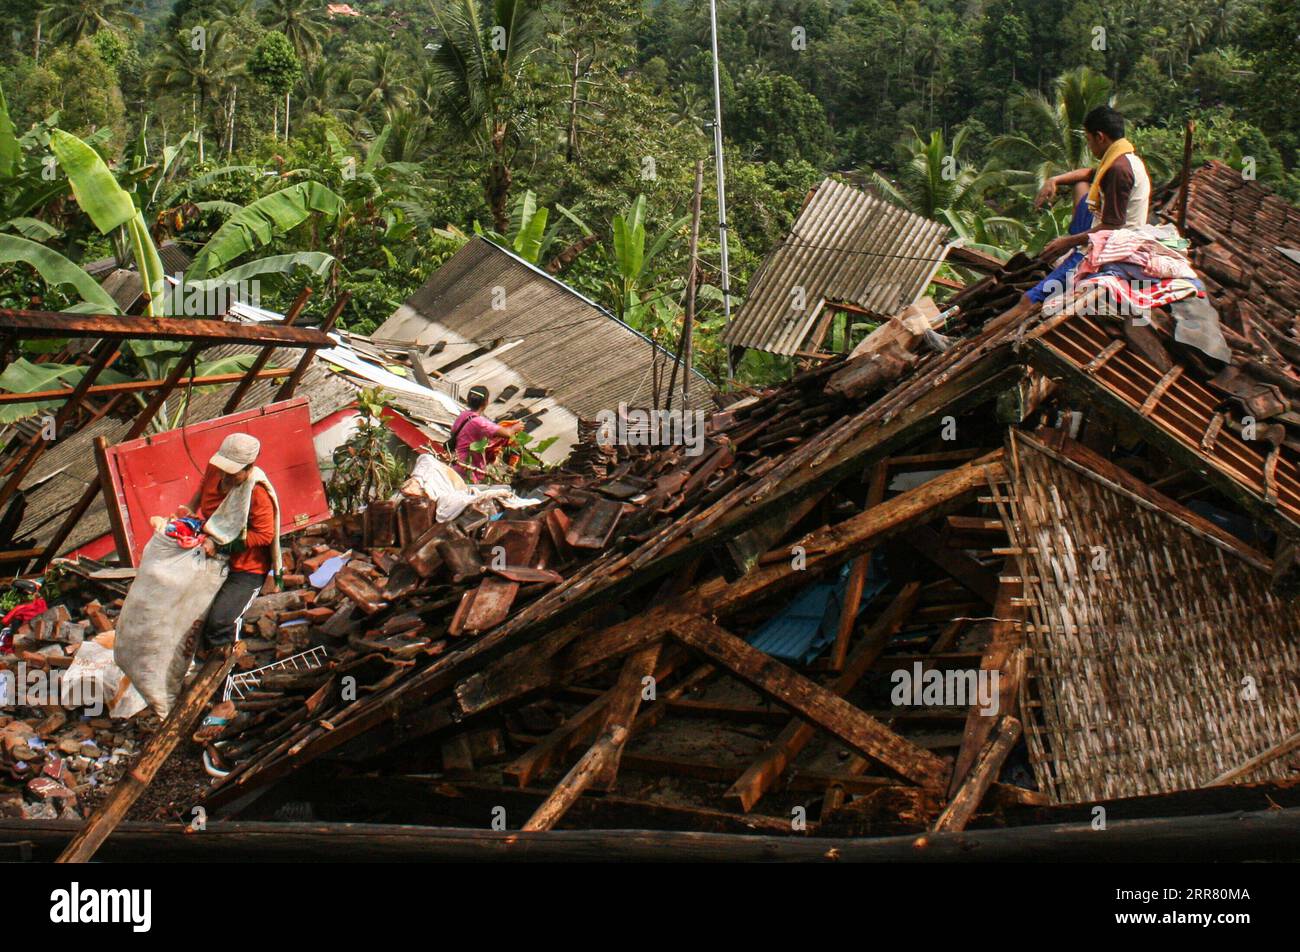 210411 -- EAST JAVA, April 11, 2021 -- People collect their belonging near damaged houses after a 6.1 magnitude quake hit Kali Uling village in Lumajang, East Java, Indonesia, April 11, 2021. Six people were killed, another one was seriously injured, and scores of buildings were damaged after a 6.1-magnitude quake rocked Indonesia s western province of East Java on Saturday, officials said. The earthquake struck at 2 p.m. Jakarta time 0700 GMT with the epicenter 96 km south of Kepanjen town of Malang district with a depth of 80 km, Andry Sembiring, an official at the Meteorology, Climatology a Stock Photo